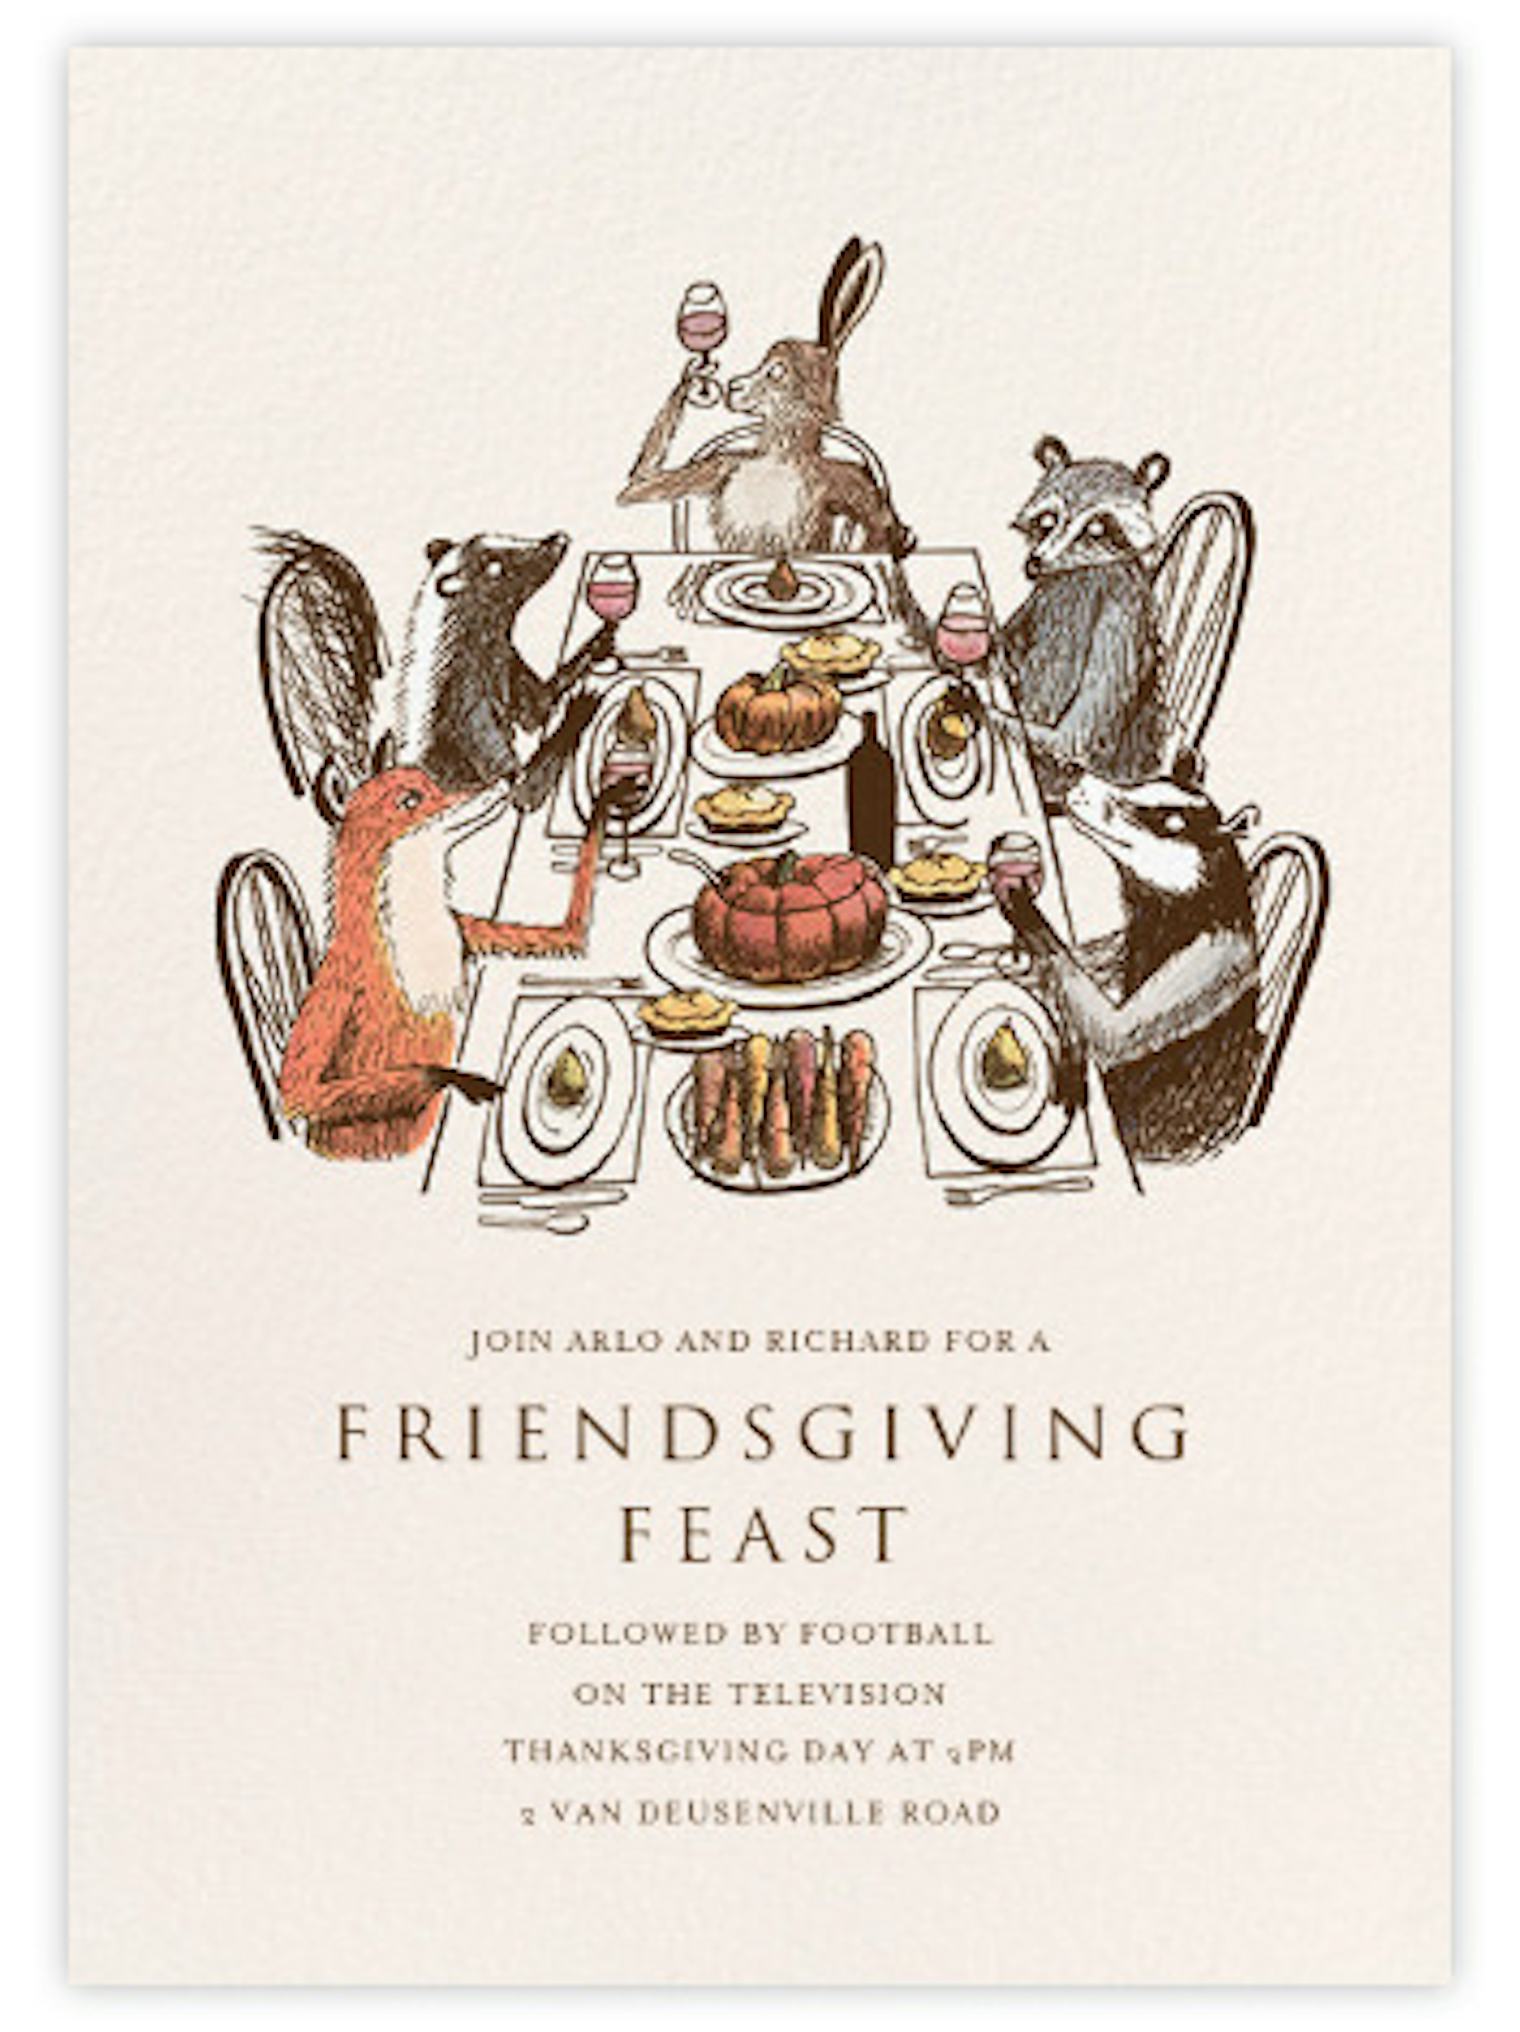 Friendsgiving 2017 Invitation Templates That Will Make You Actually